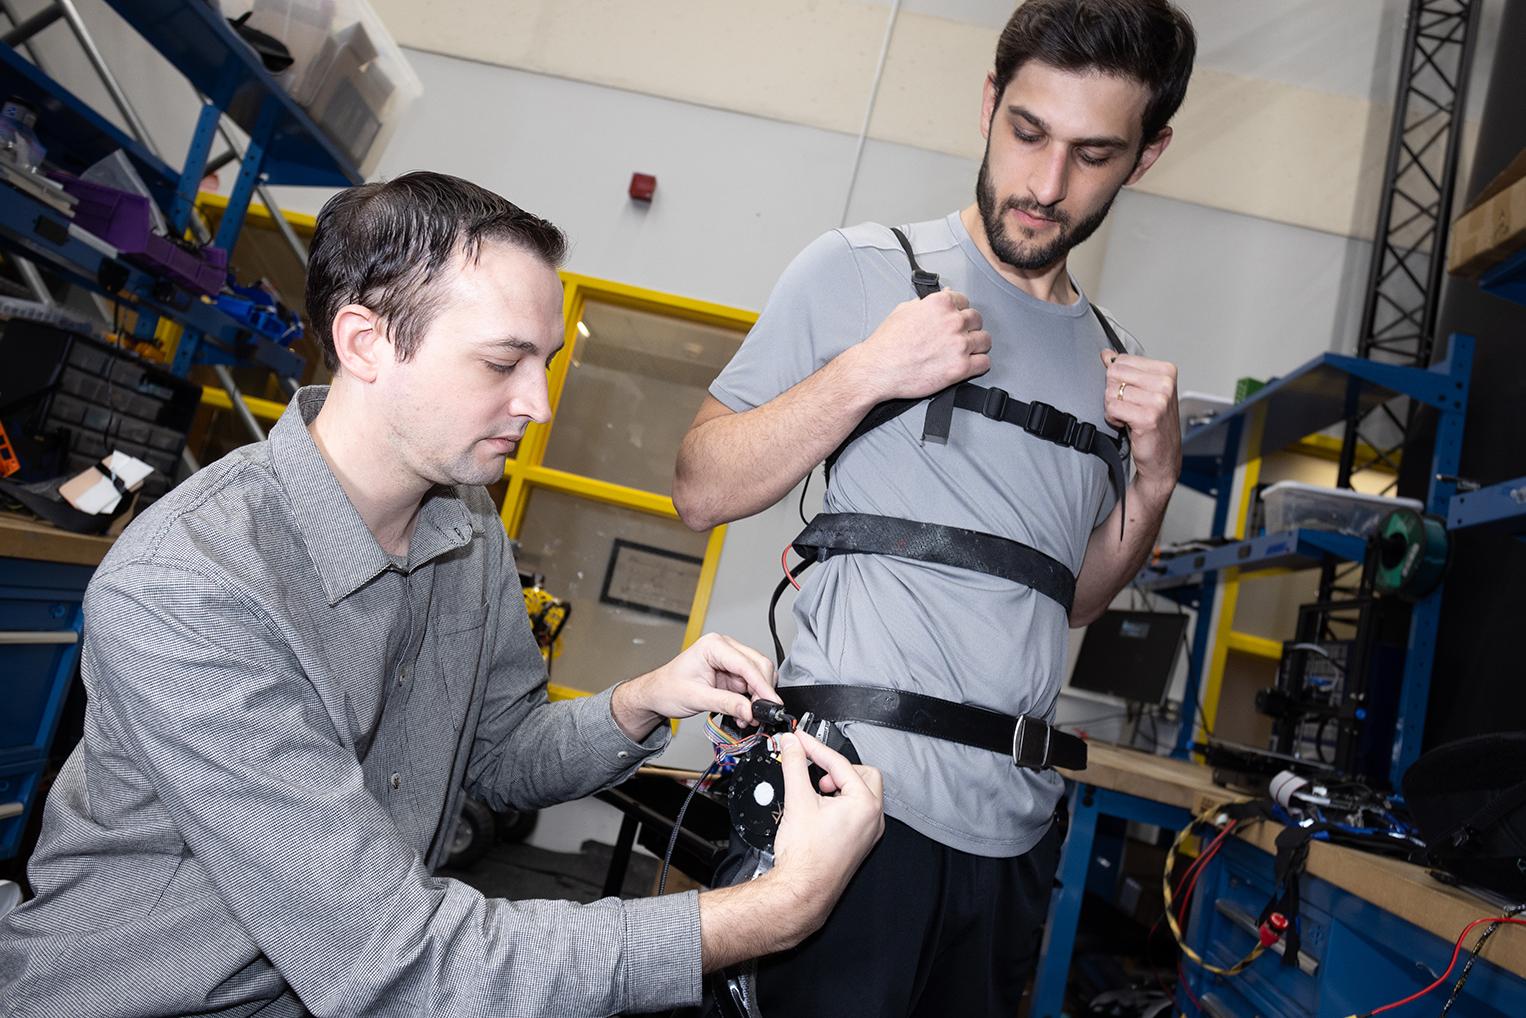 Researcher Aaron Young makes adjustments to an experimental exoskeleton worn by then-Ph.D. student Dean Molinaro.